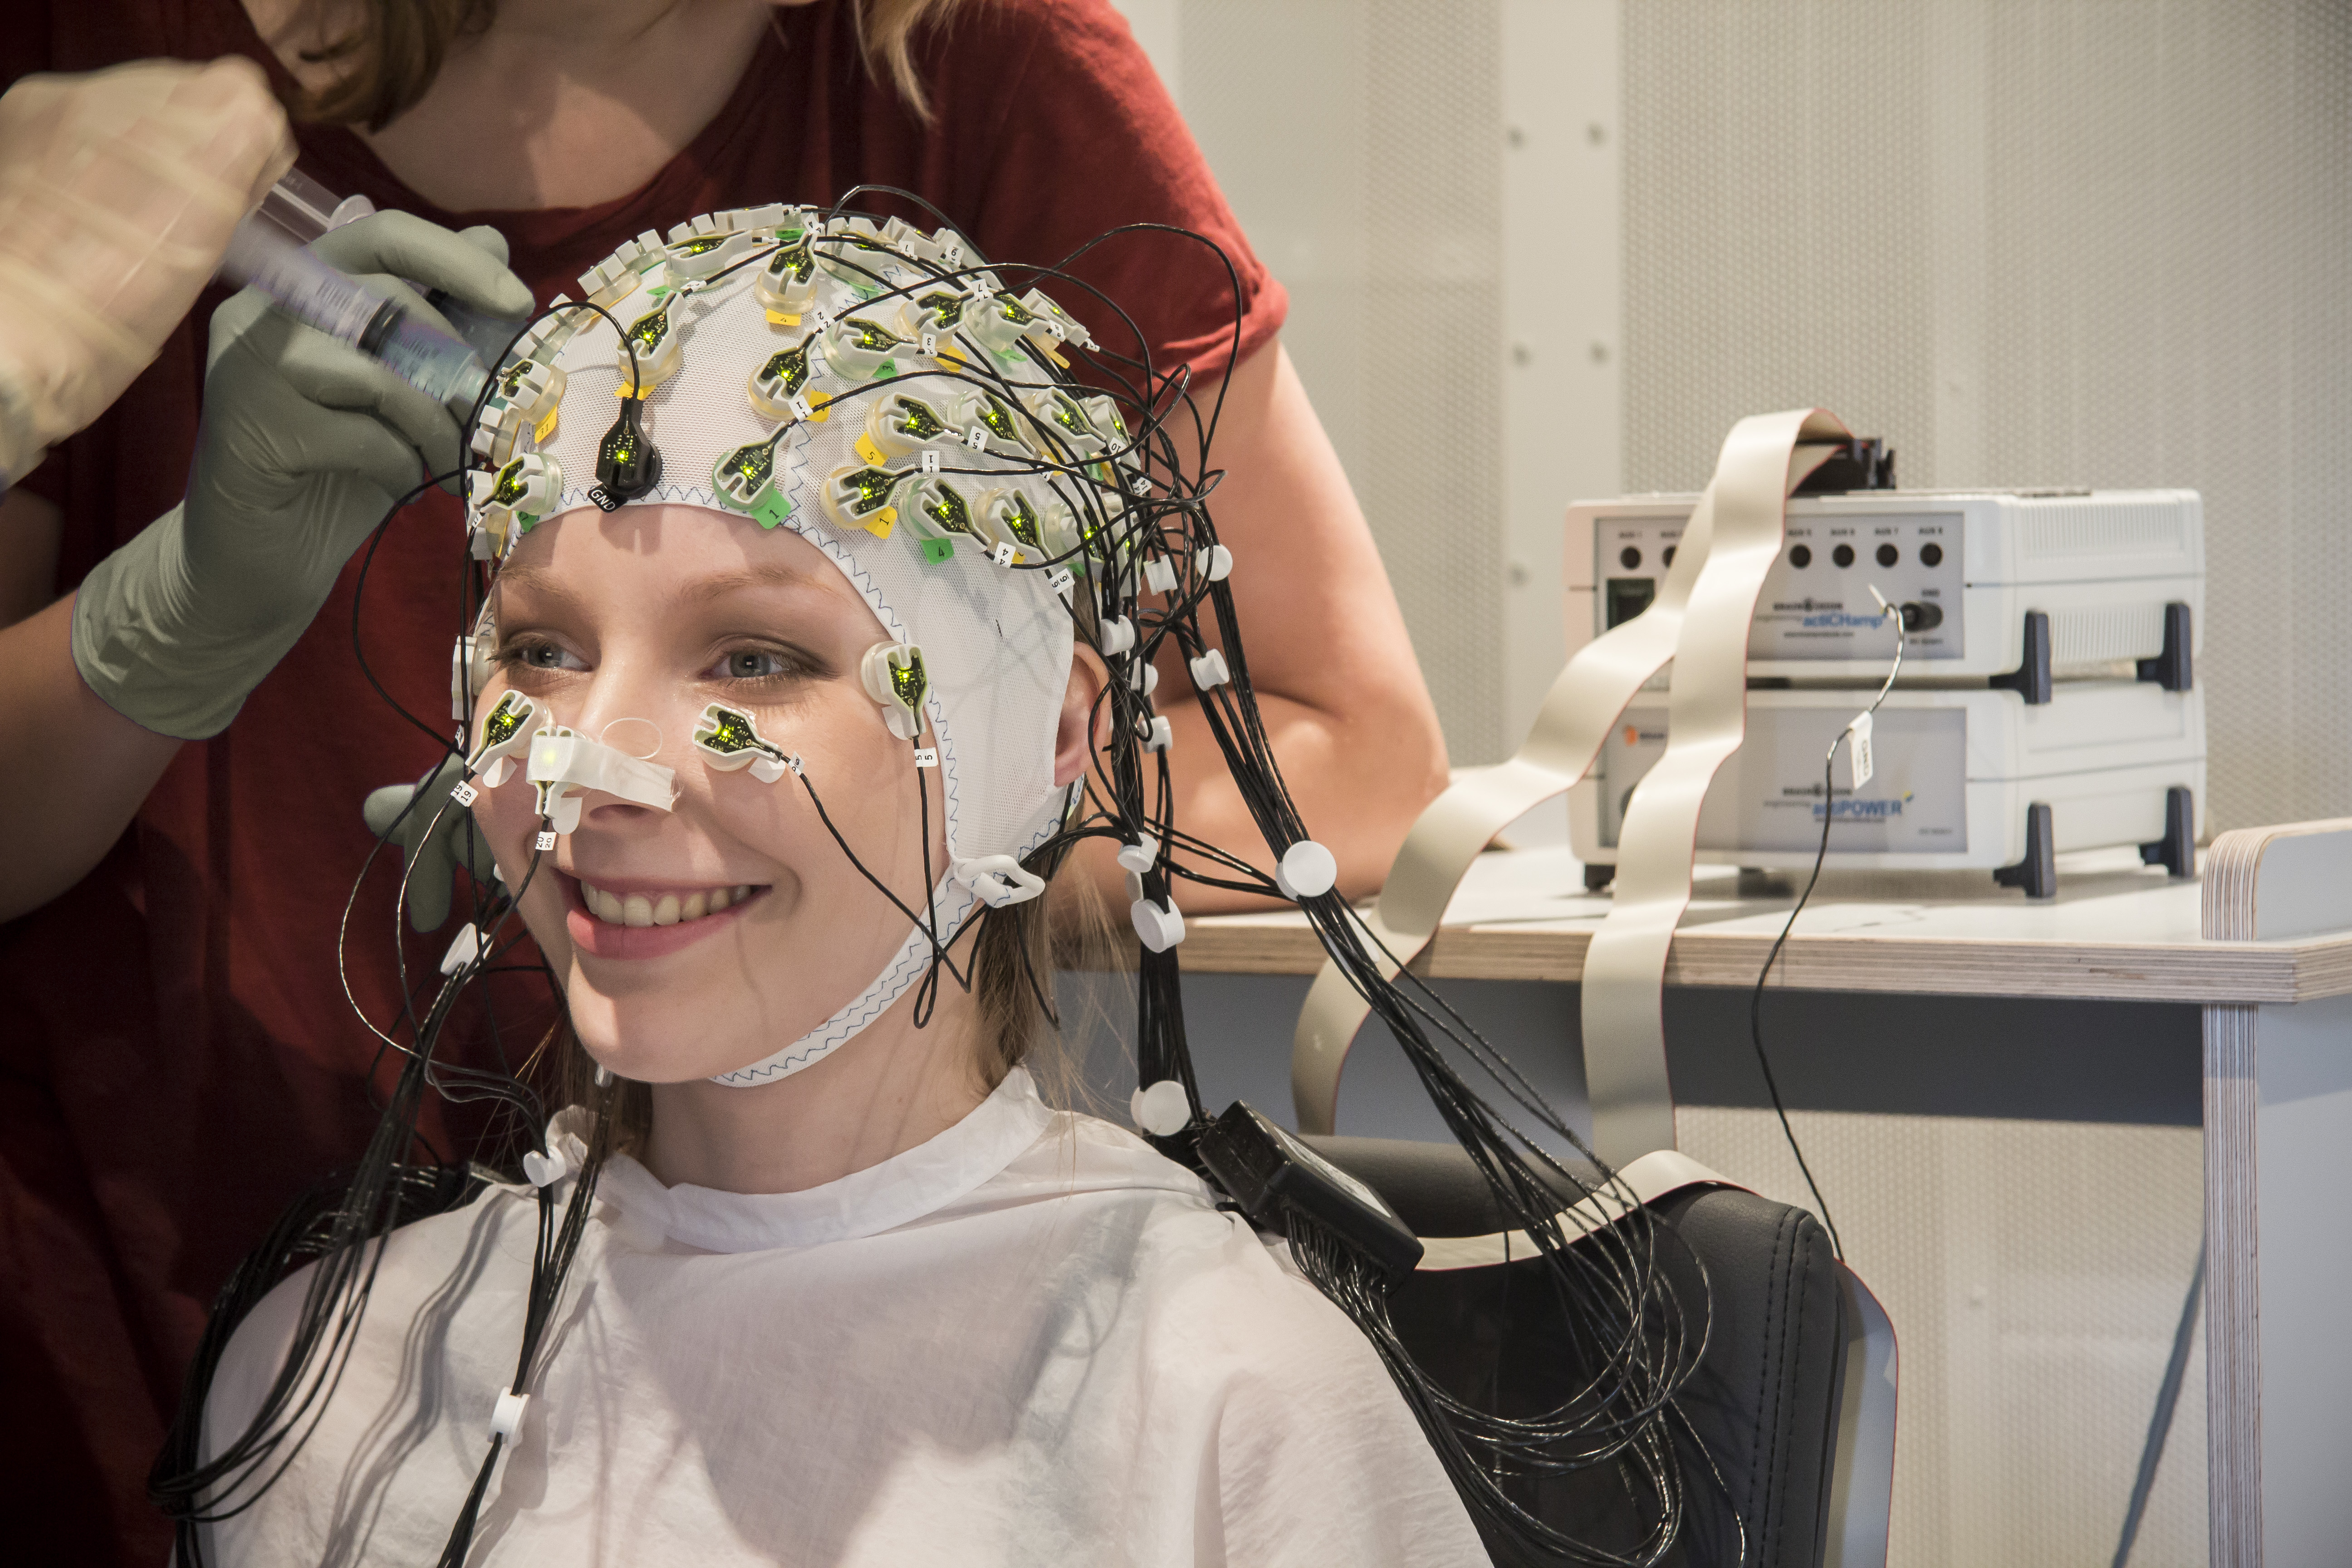 Application of contact gel to EEG electrodes